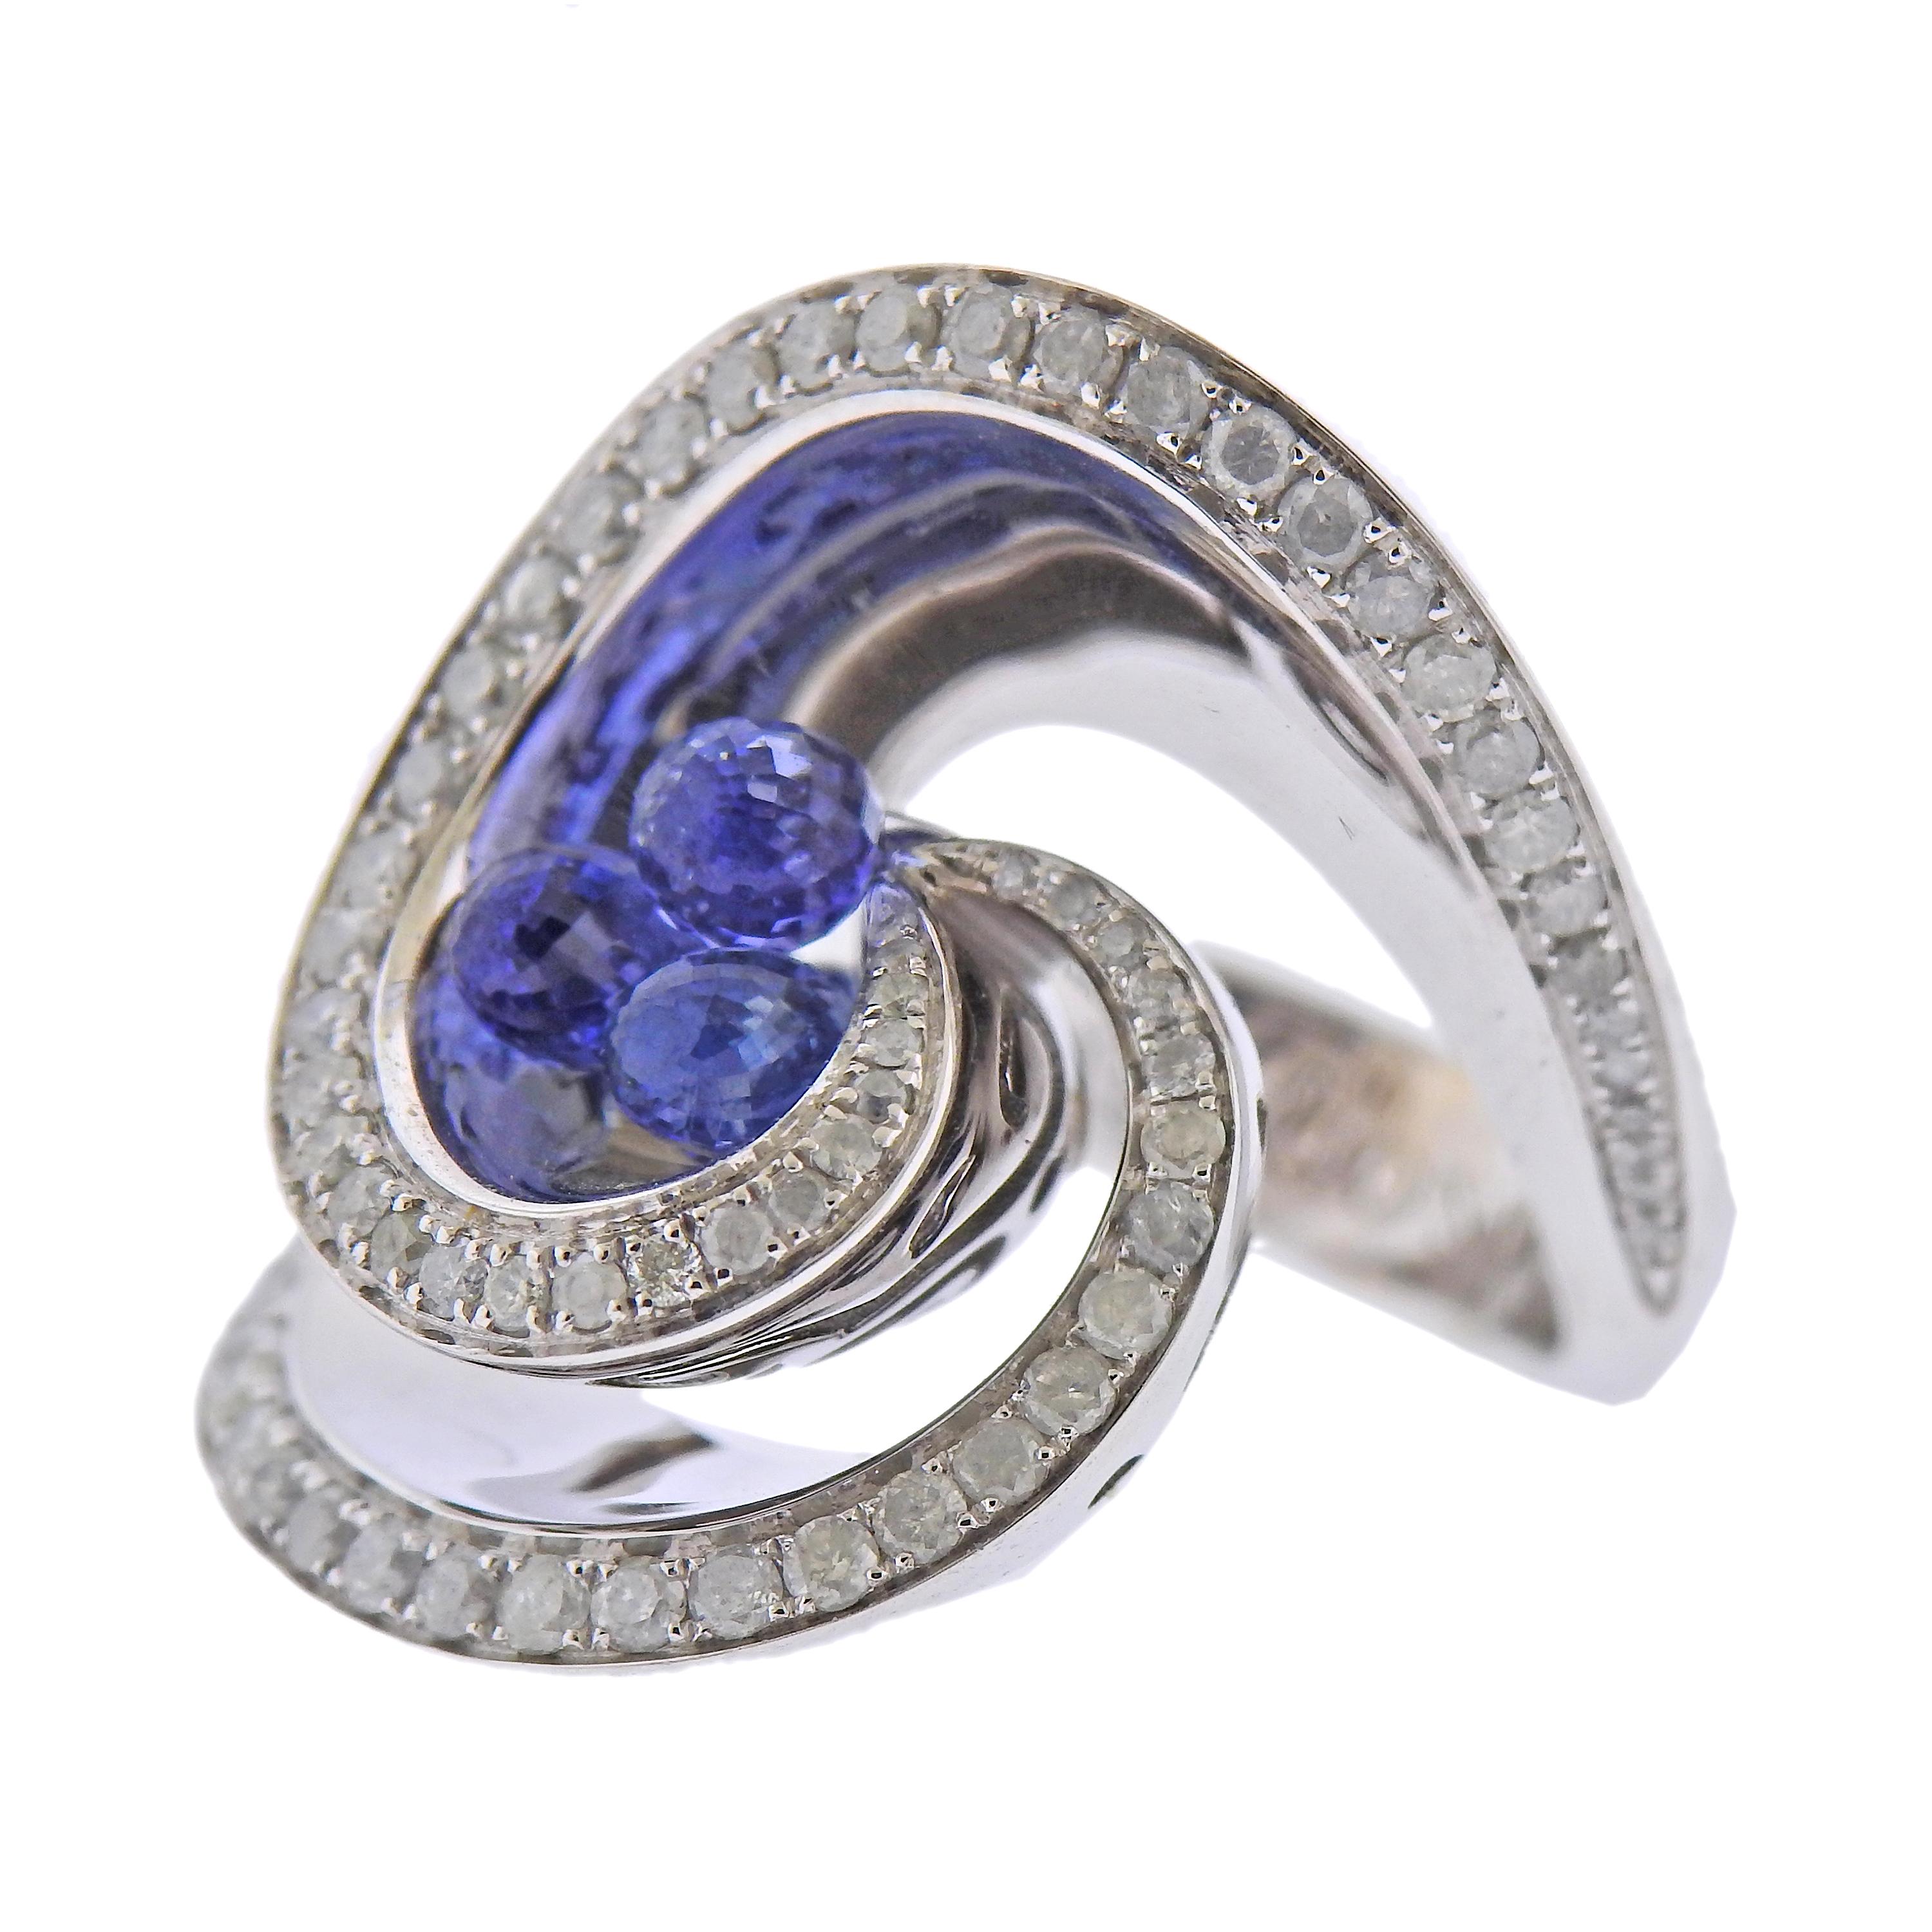 Brand new 18k white gold Chiocciolina ring by De Grisogono, set with 1.03ctw in icy diamonds, and 1.50ctw in sapphire briolettes. Ring size - 5.5 (50), ring top - 25mm wide. Marked - de Grisogono, Au750, B67030. Weight- 16.8 grams. Ring comes with